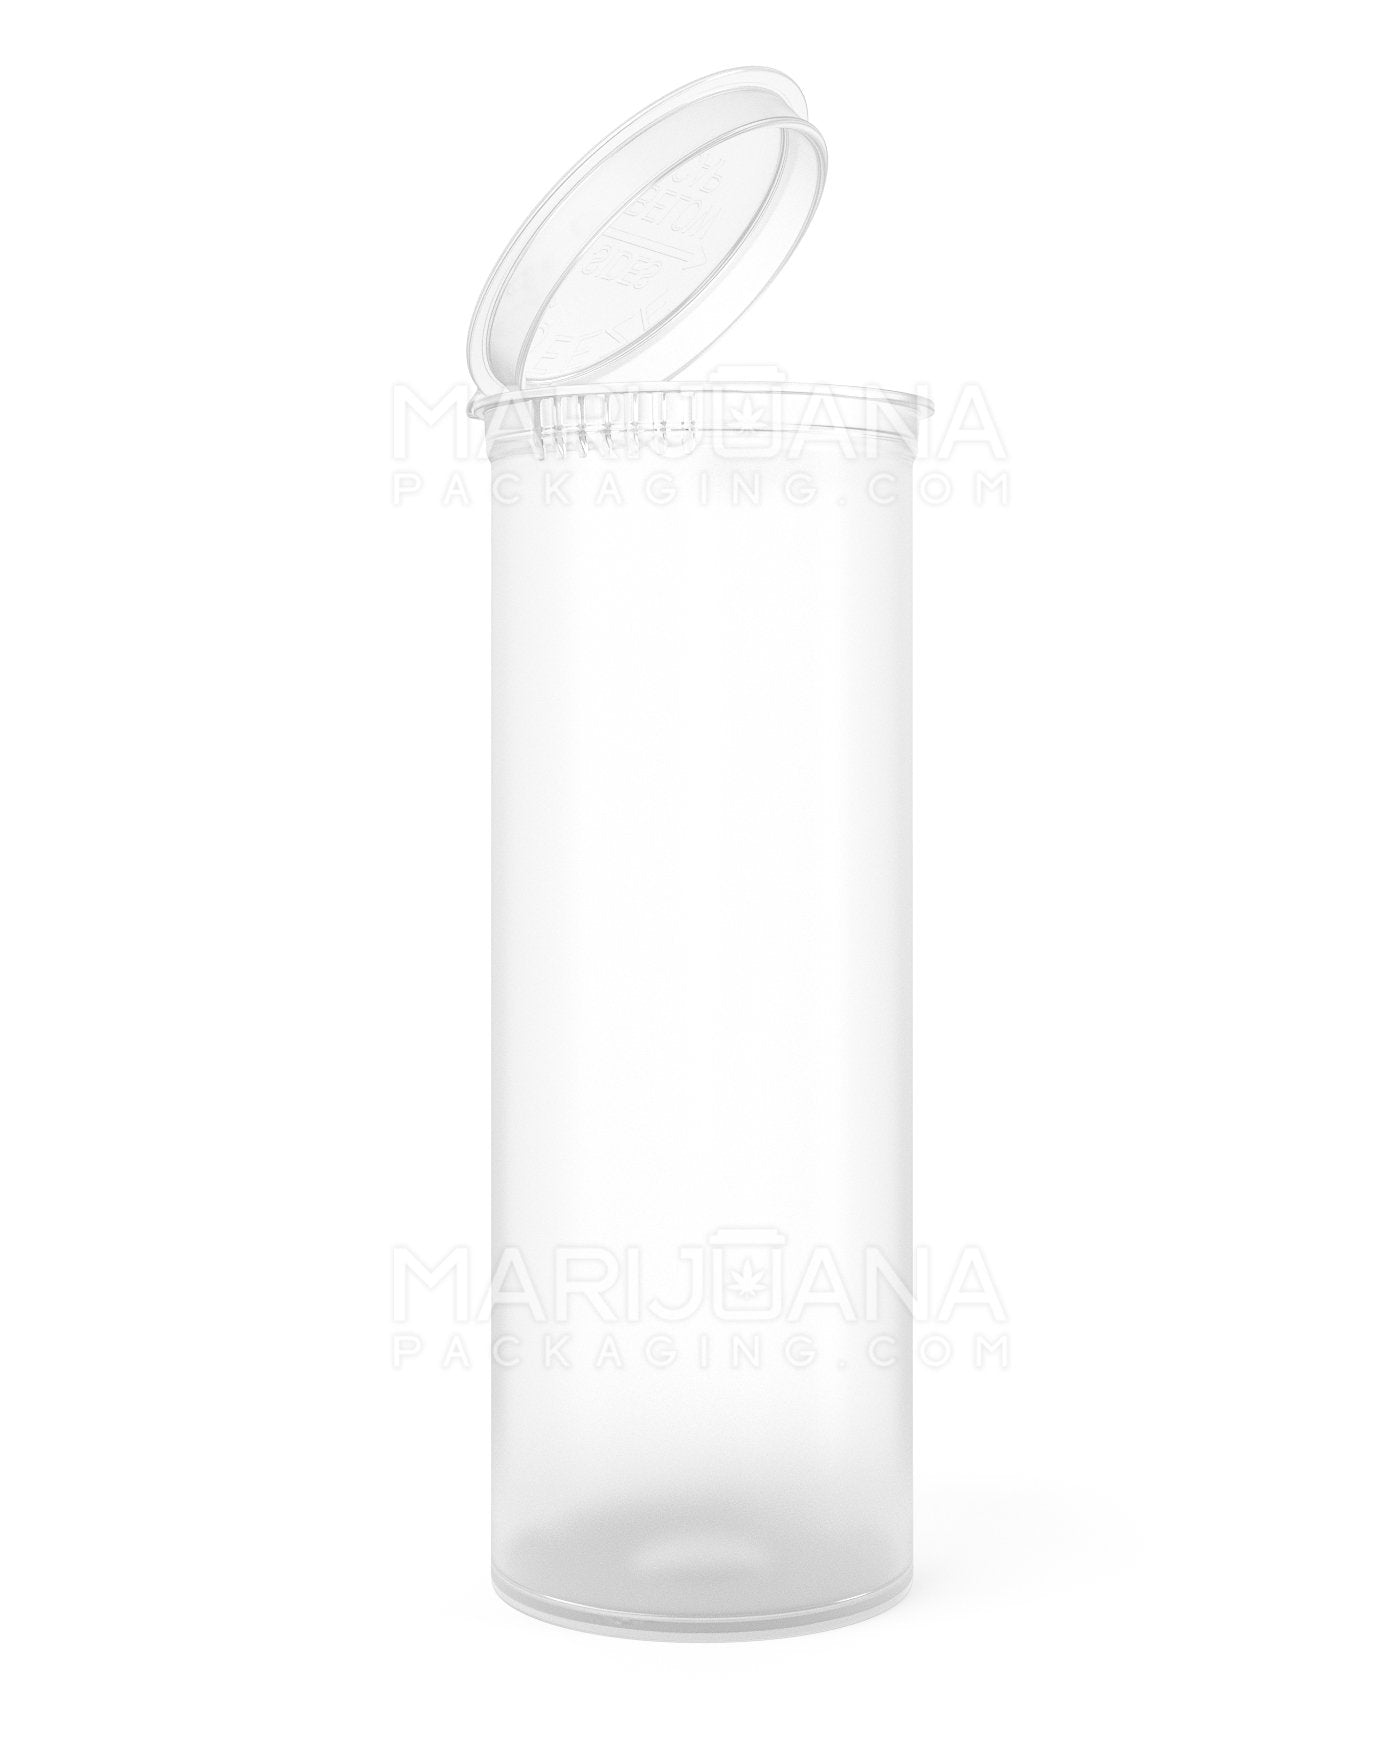 Child Resistant & Sustainable 100% Biodegradable Clear Pop Top Bottles | 60dr - 14g | Sample - 1